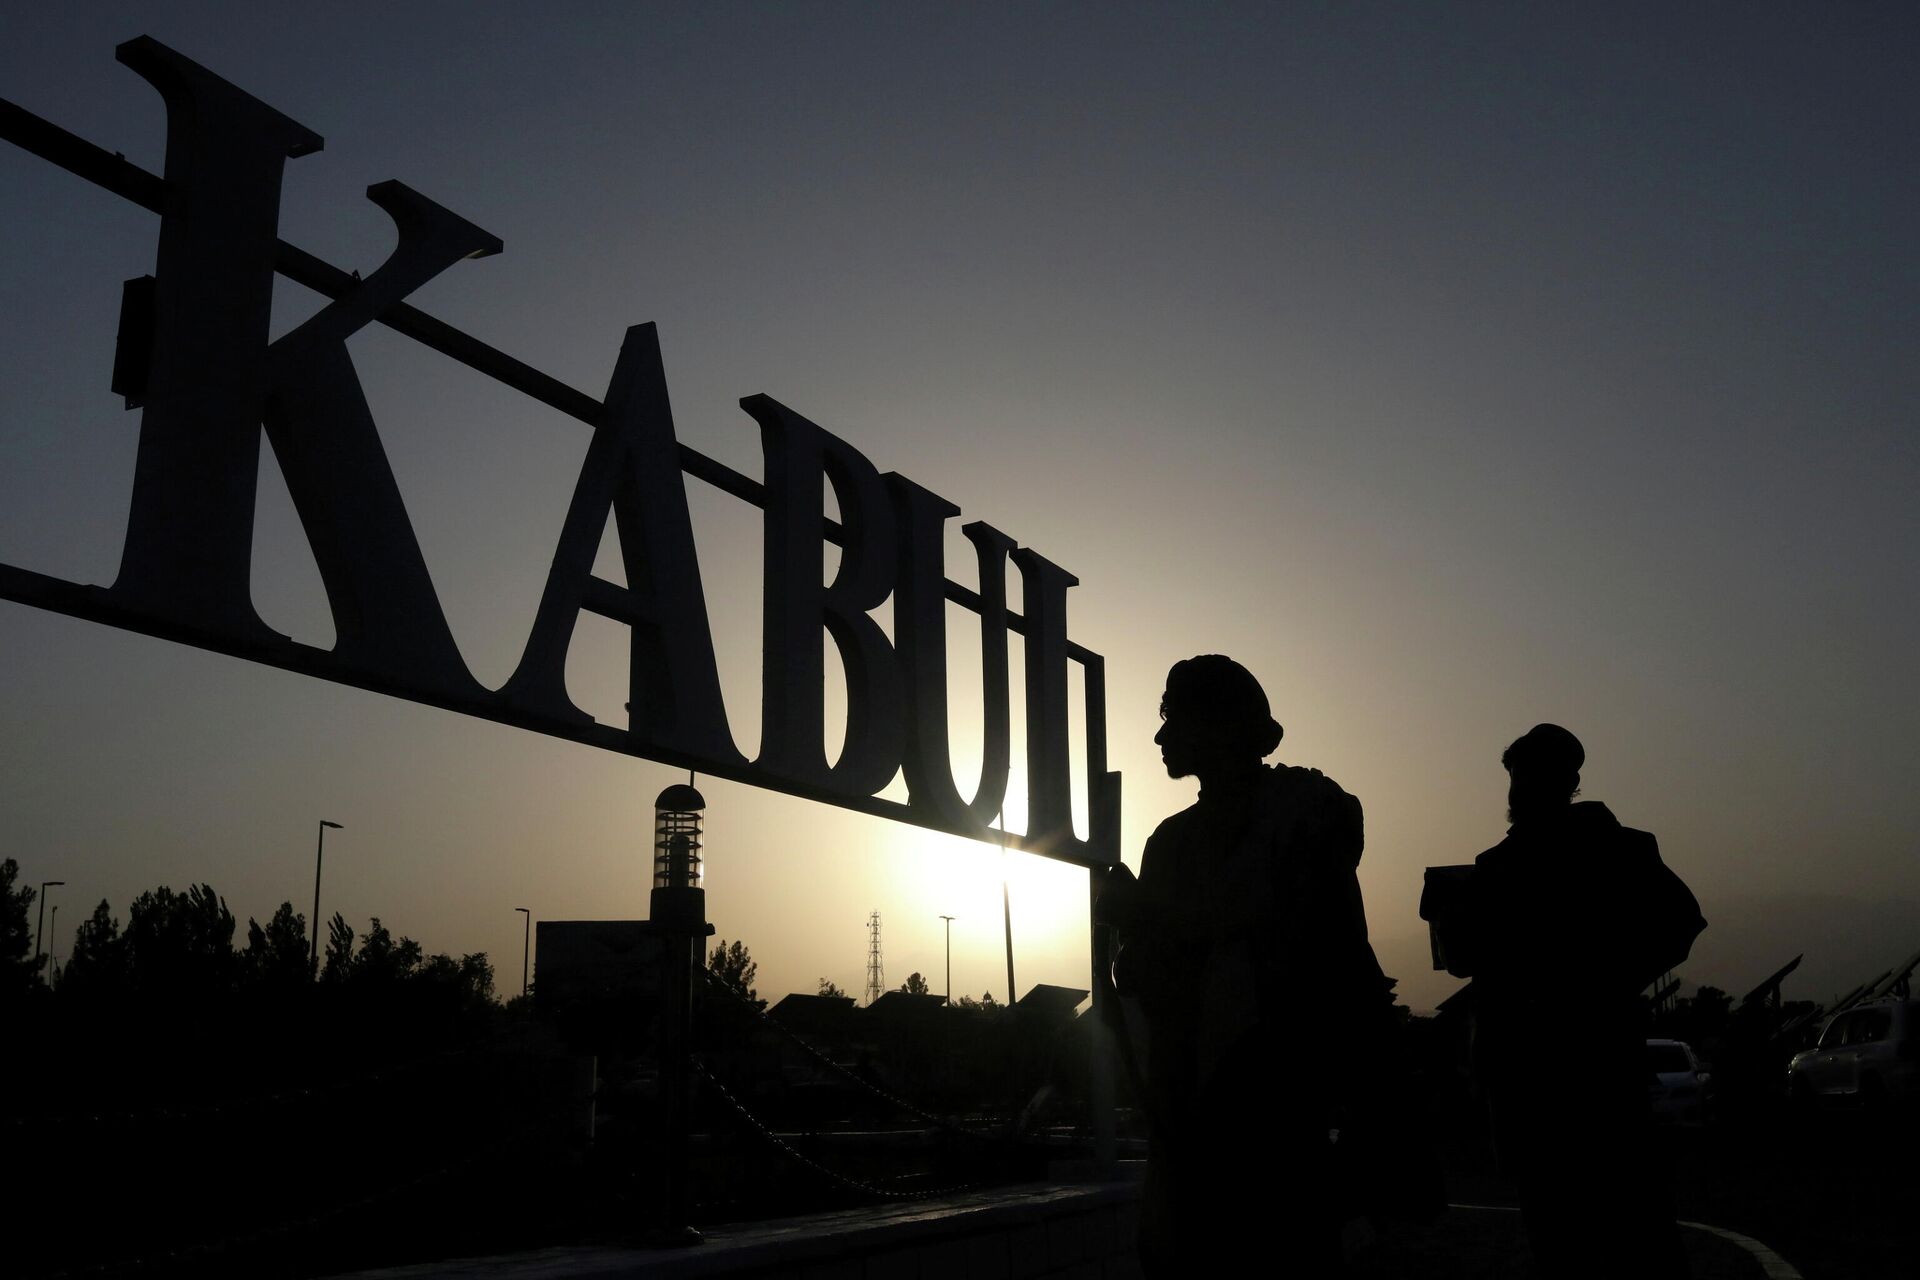 Taliban soldiers stand in front of a sign at the international airport in Kabul, Afghanistan, September 9, 2021 - Sputnik International, 1920, 22.09.2021